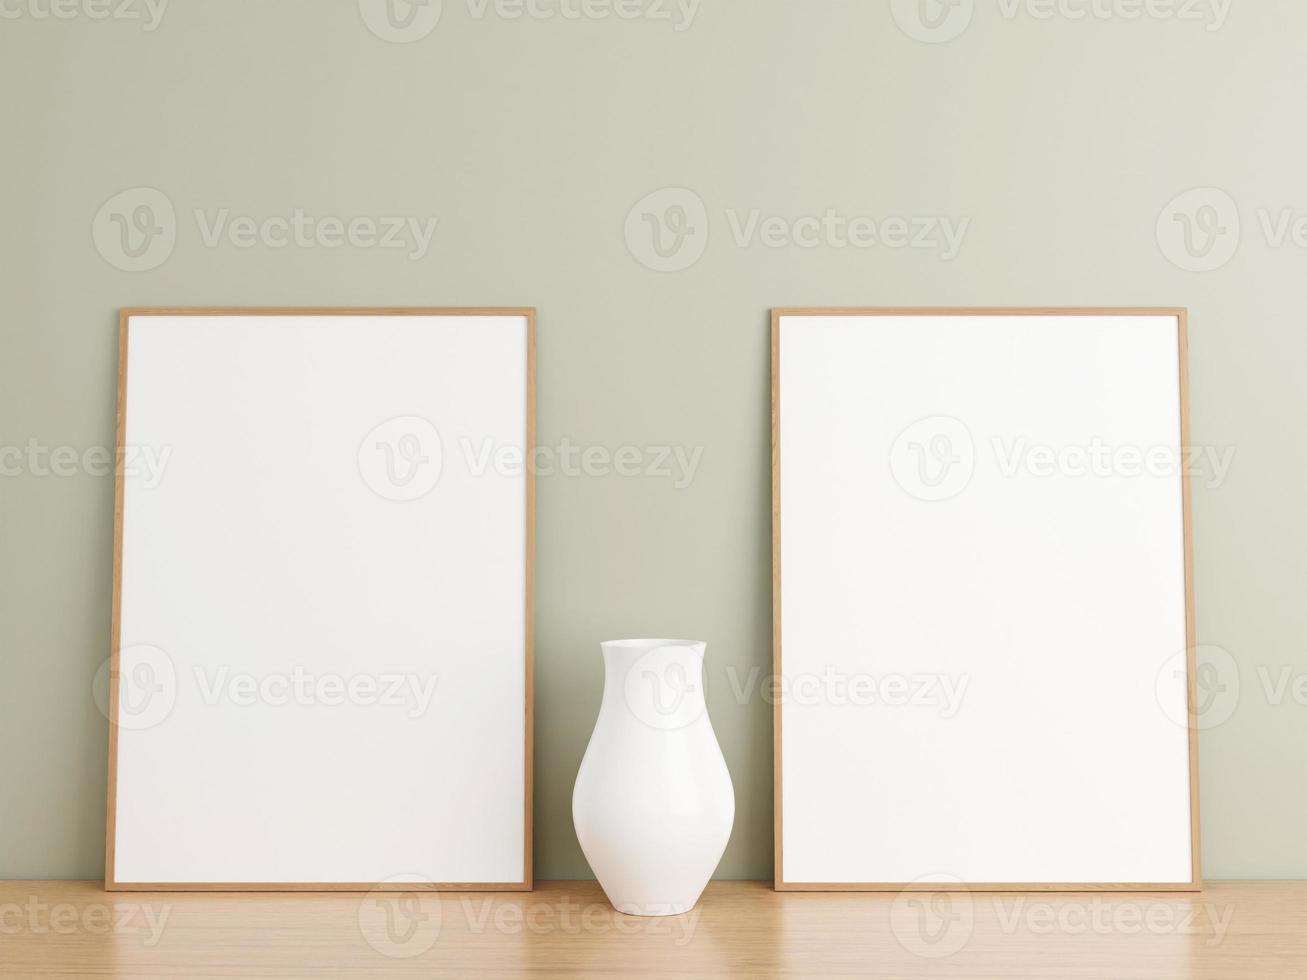 Minimalist vertical wooden poster or photo frame mockup on wooden floor leaning against the wall. 3D Rendering.